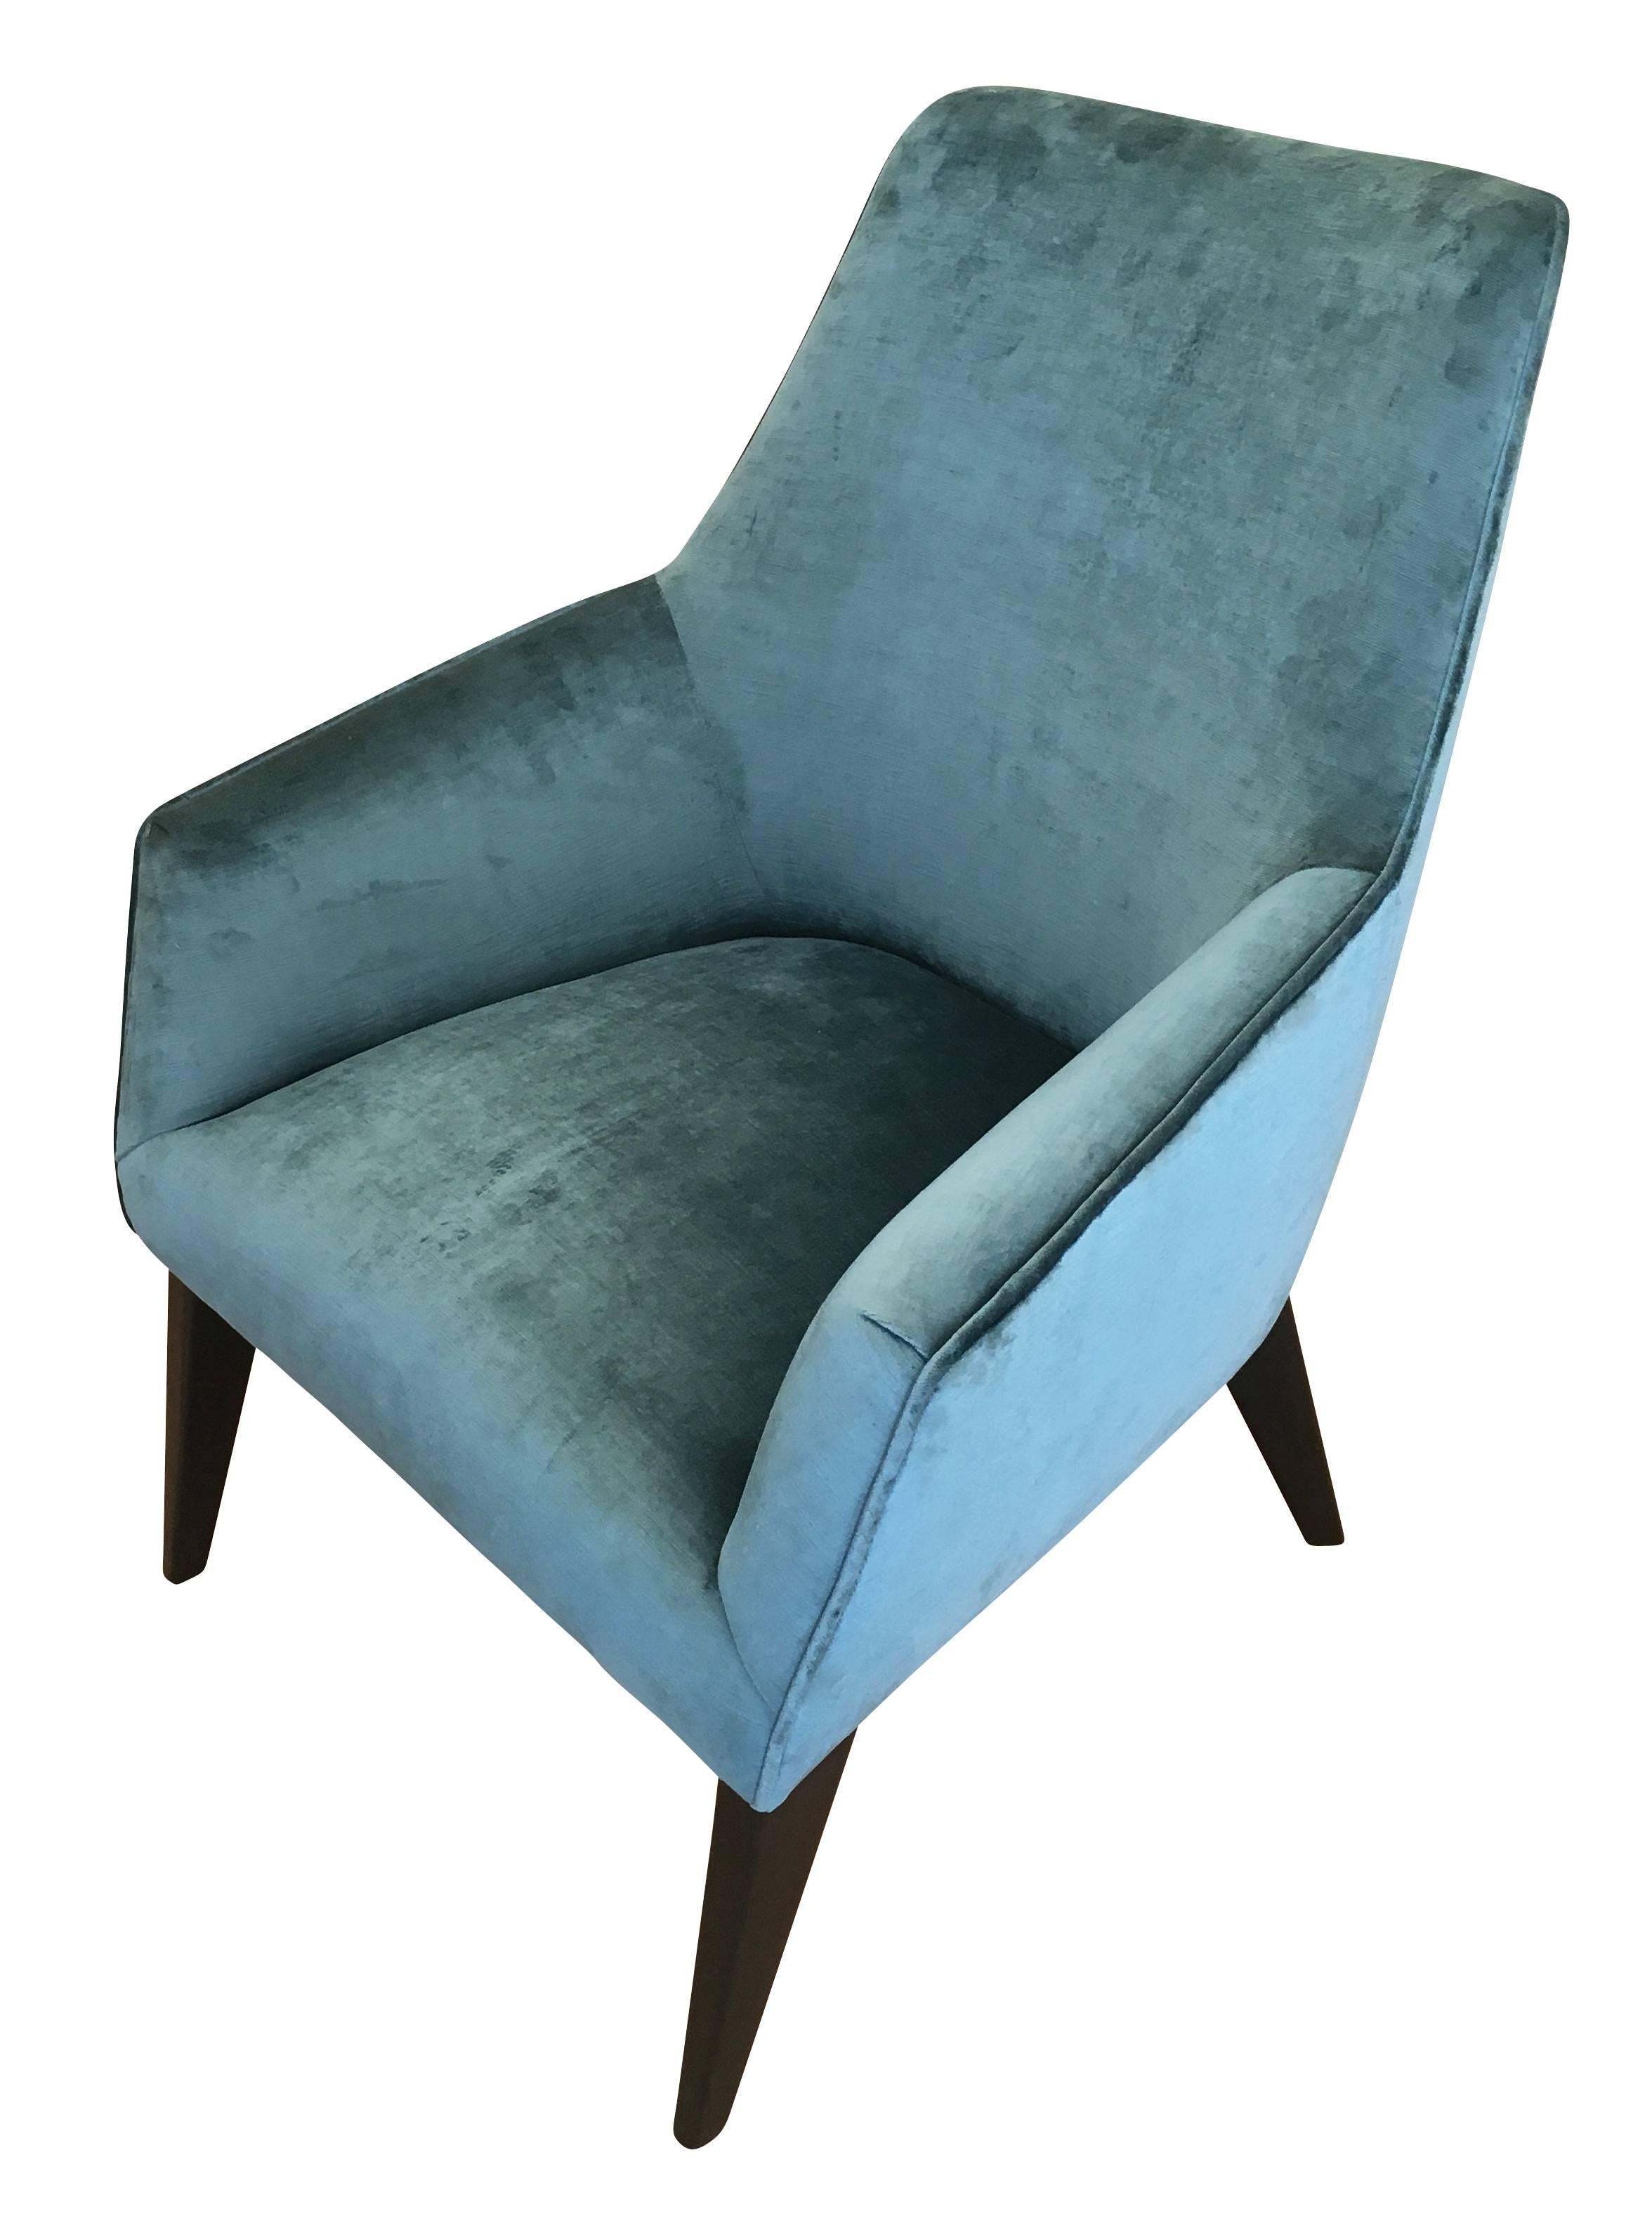 Pair of midcentury lounge chairs in the manner of Gio Ponti with ebonized legs. One has been upholstered in a teal velvet for display purposes and the other is still in original condition. Price per pair but can be sold separately if needed.